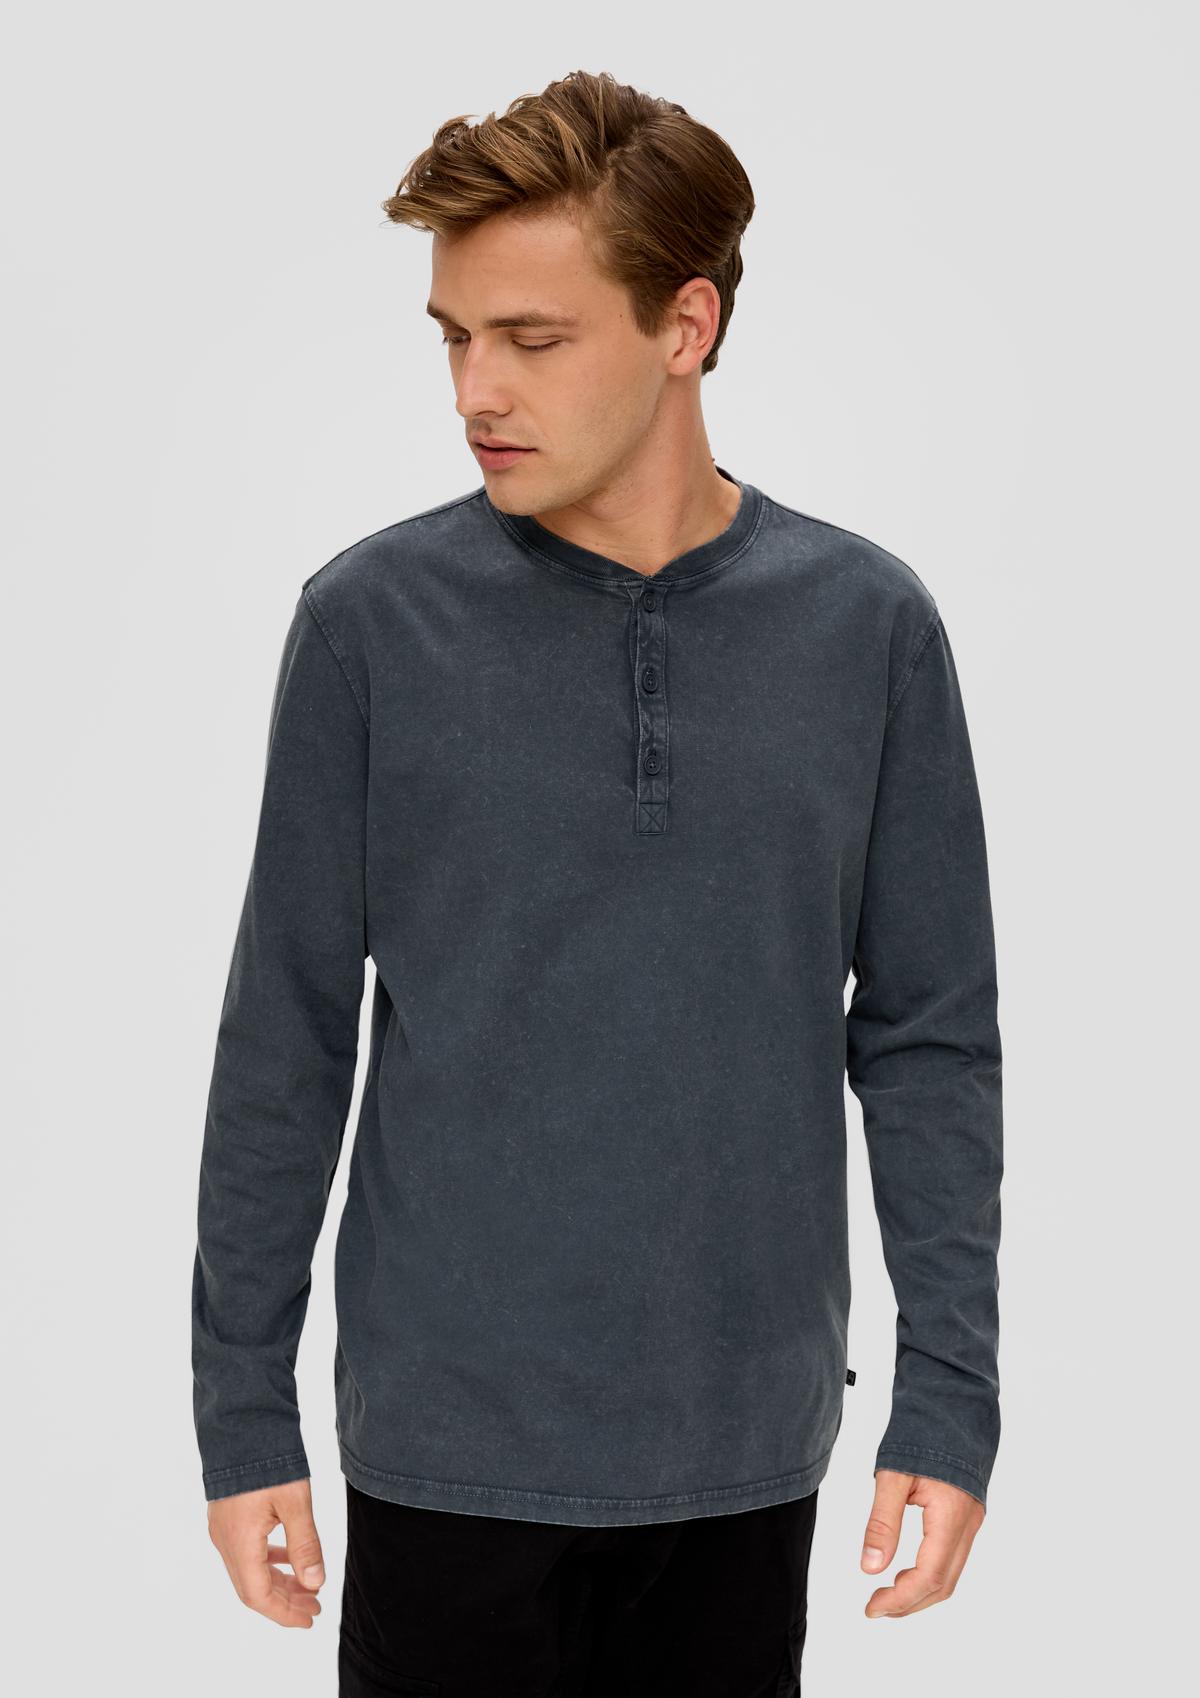 Long sleeve top with a Henley neckline